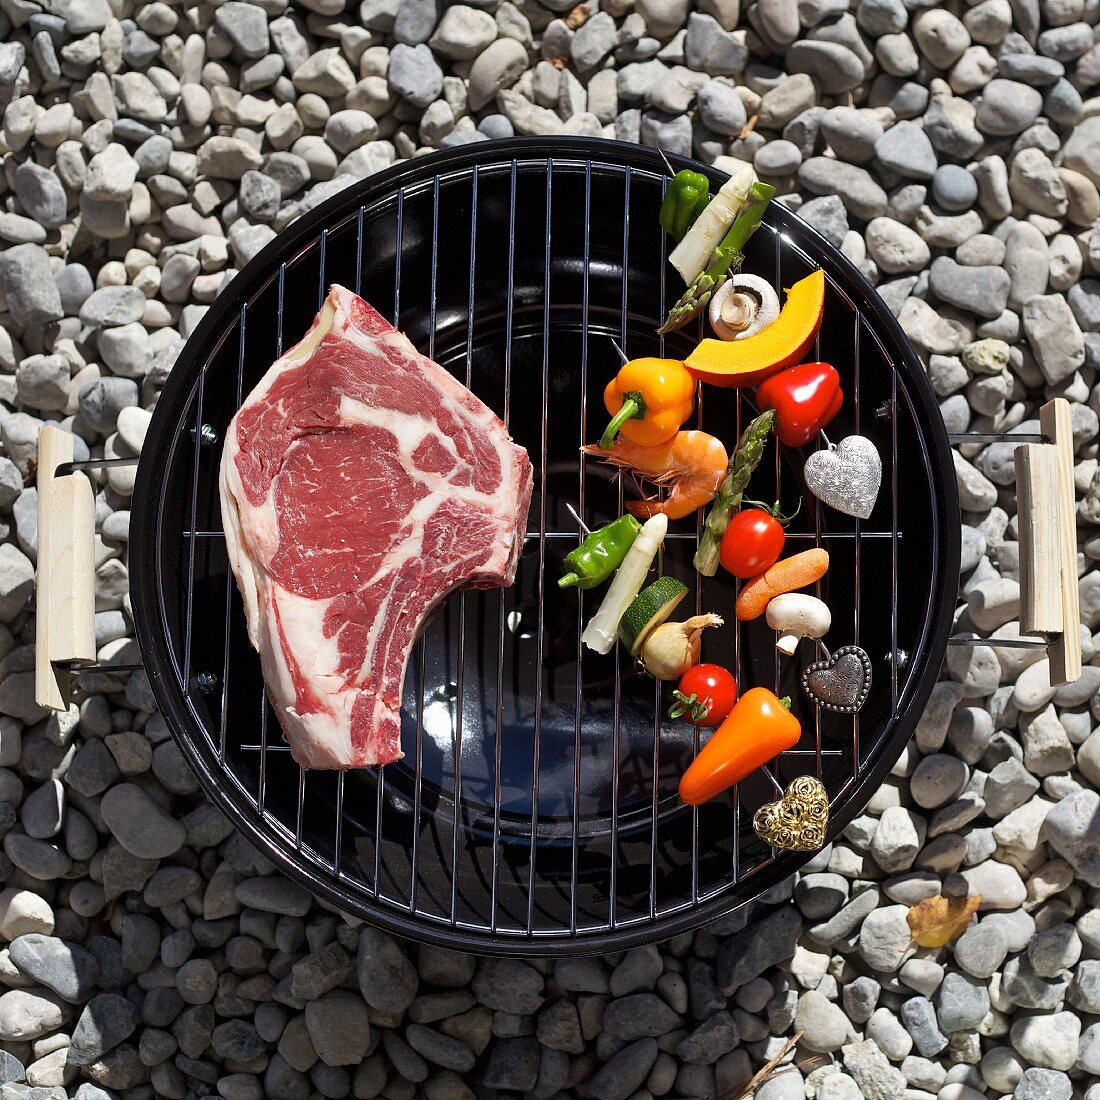 A raw T-bone steak and vegetables on a barbecue